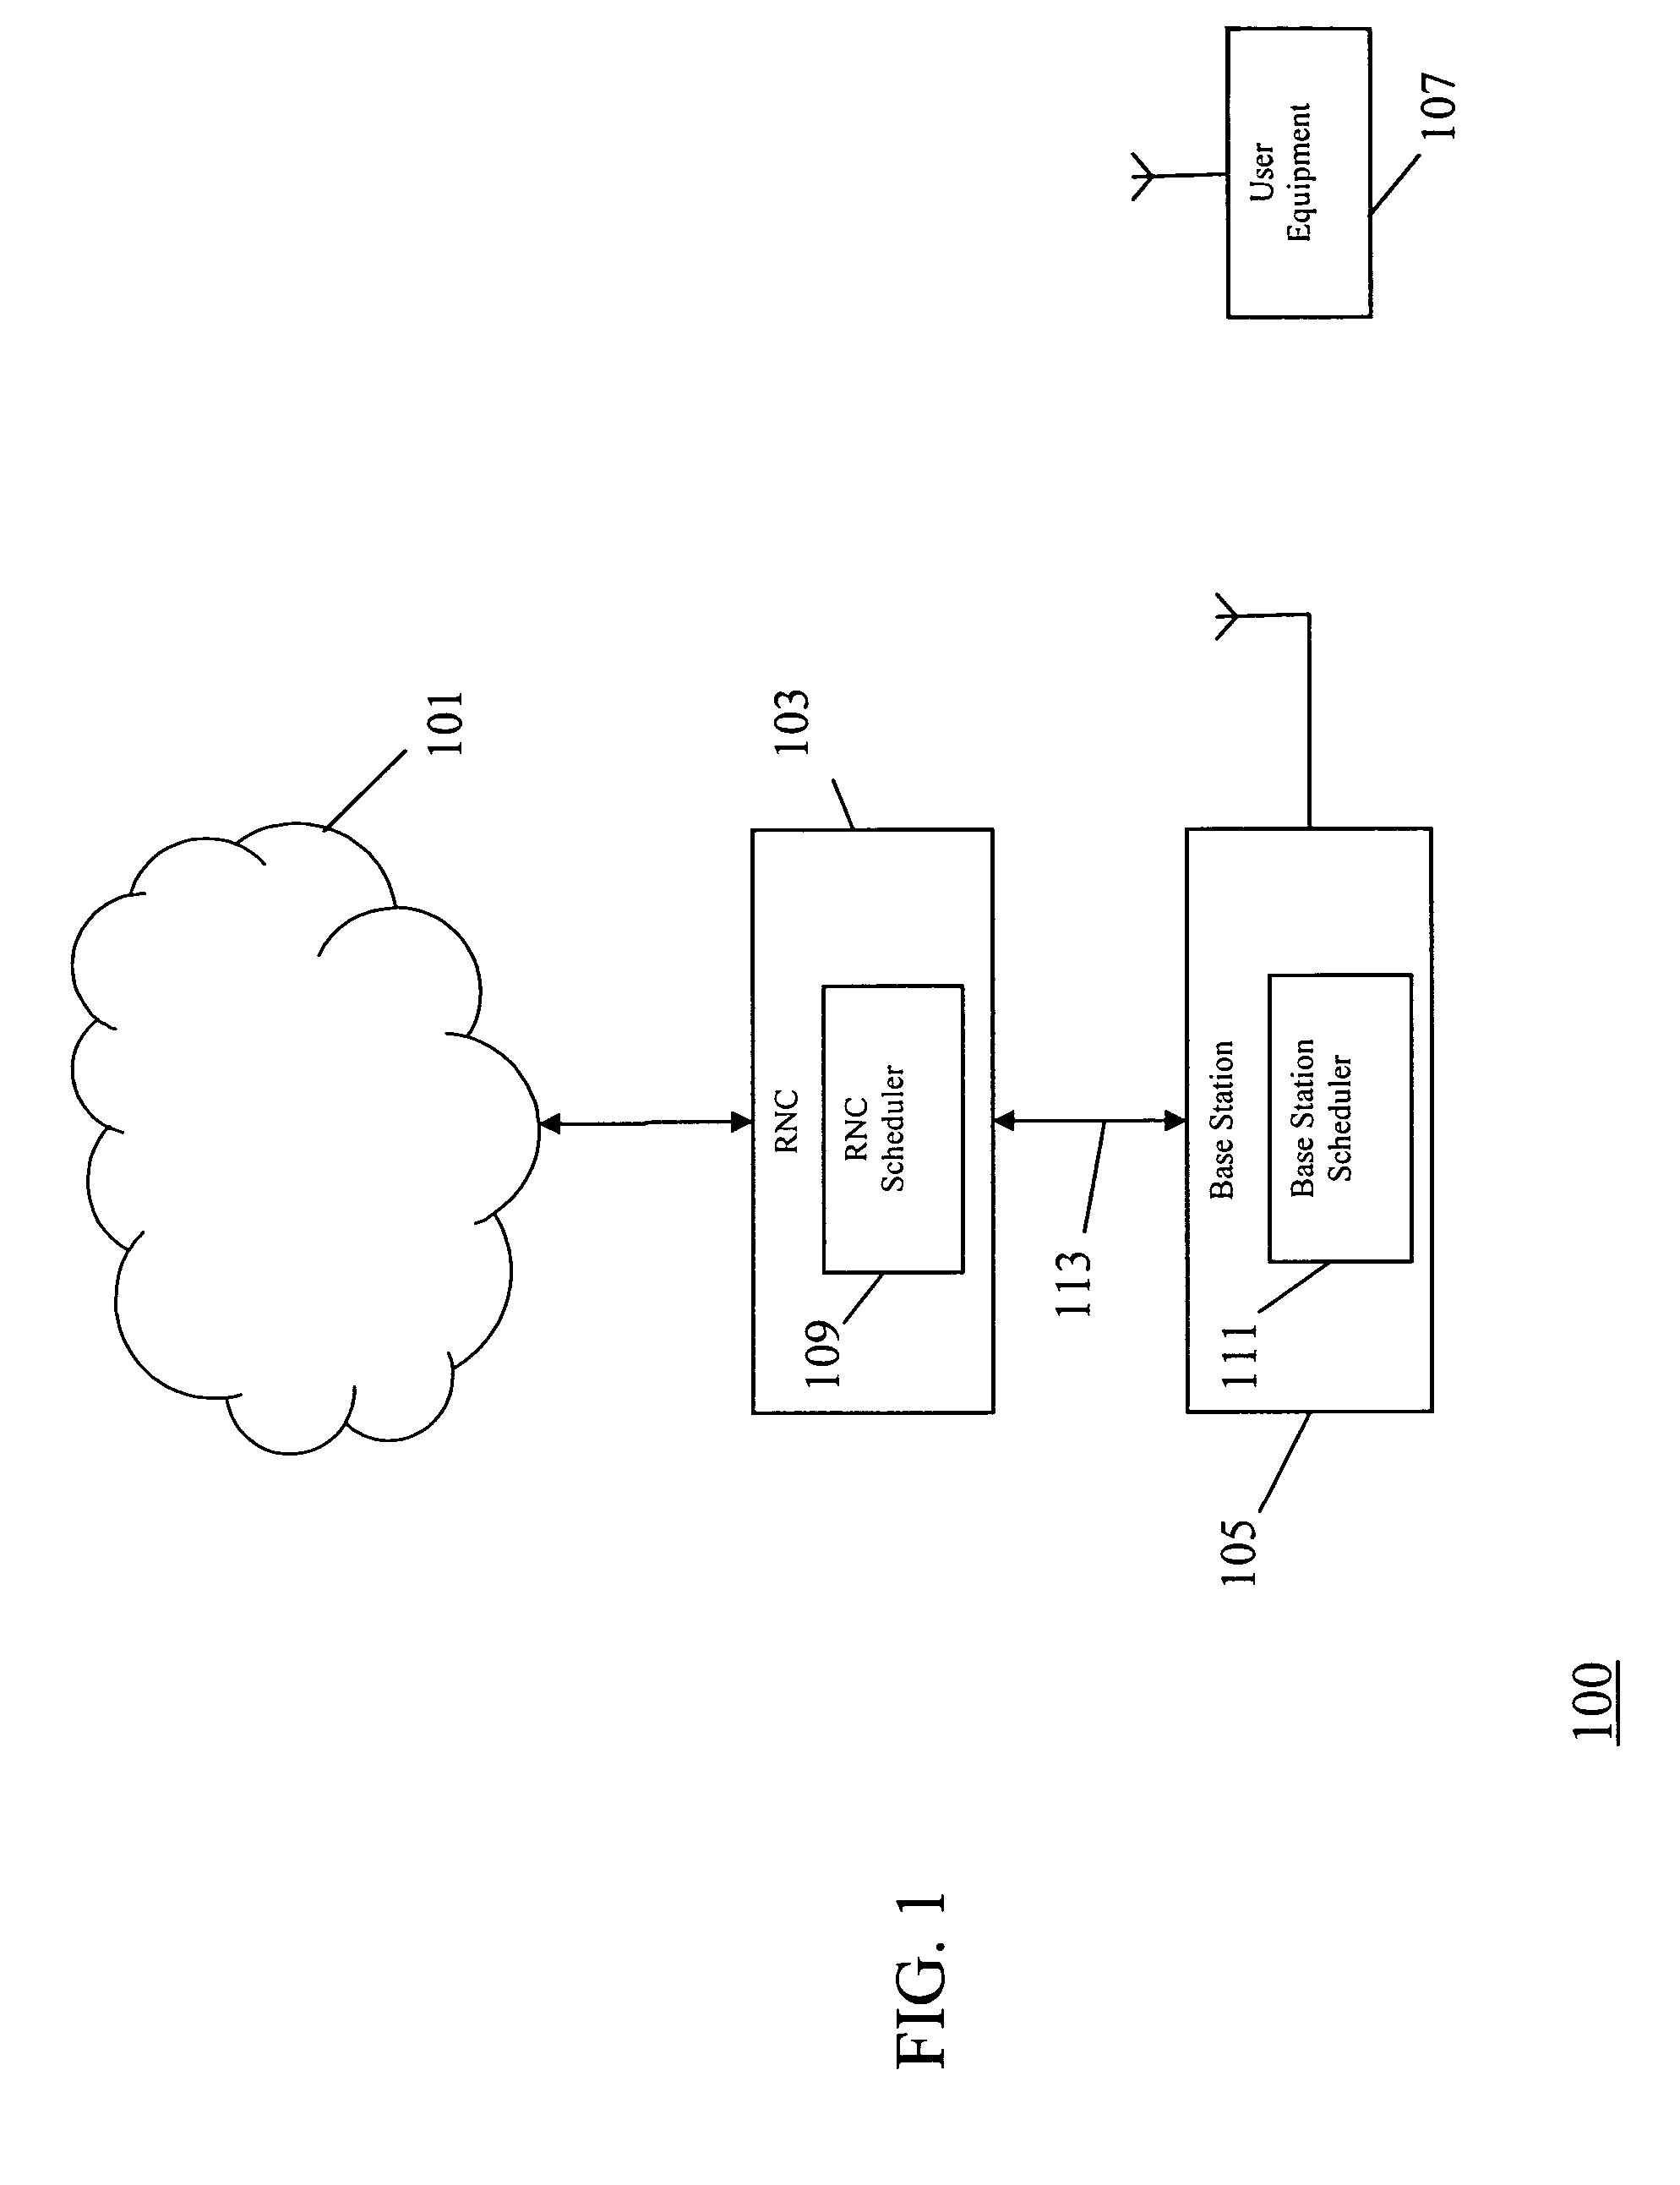 Flow control in a cellular communication system